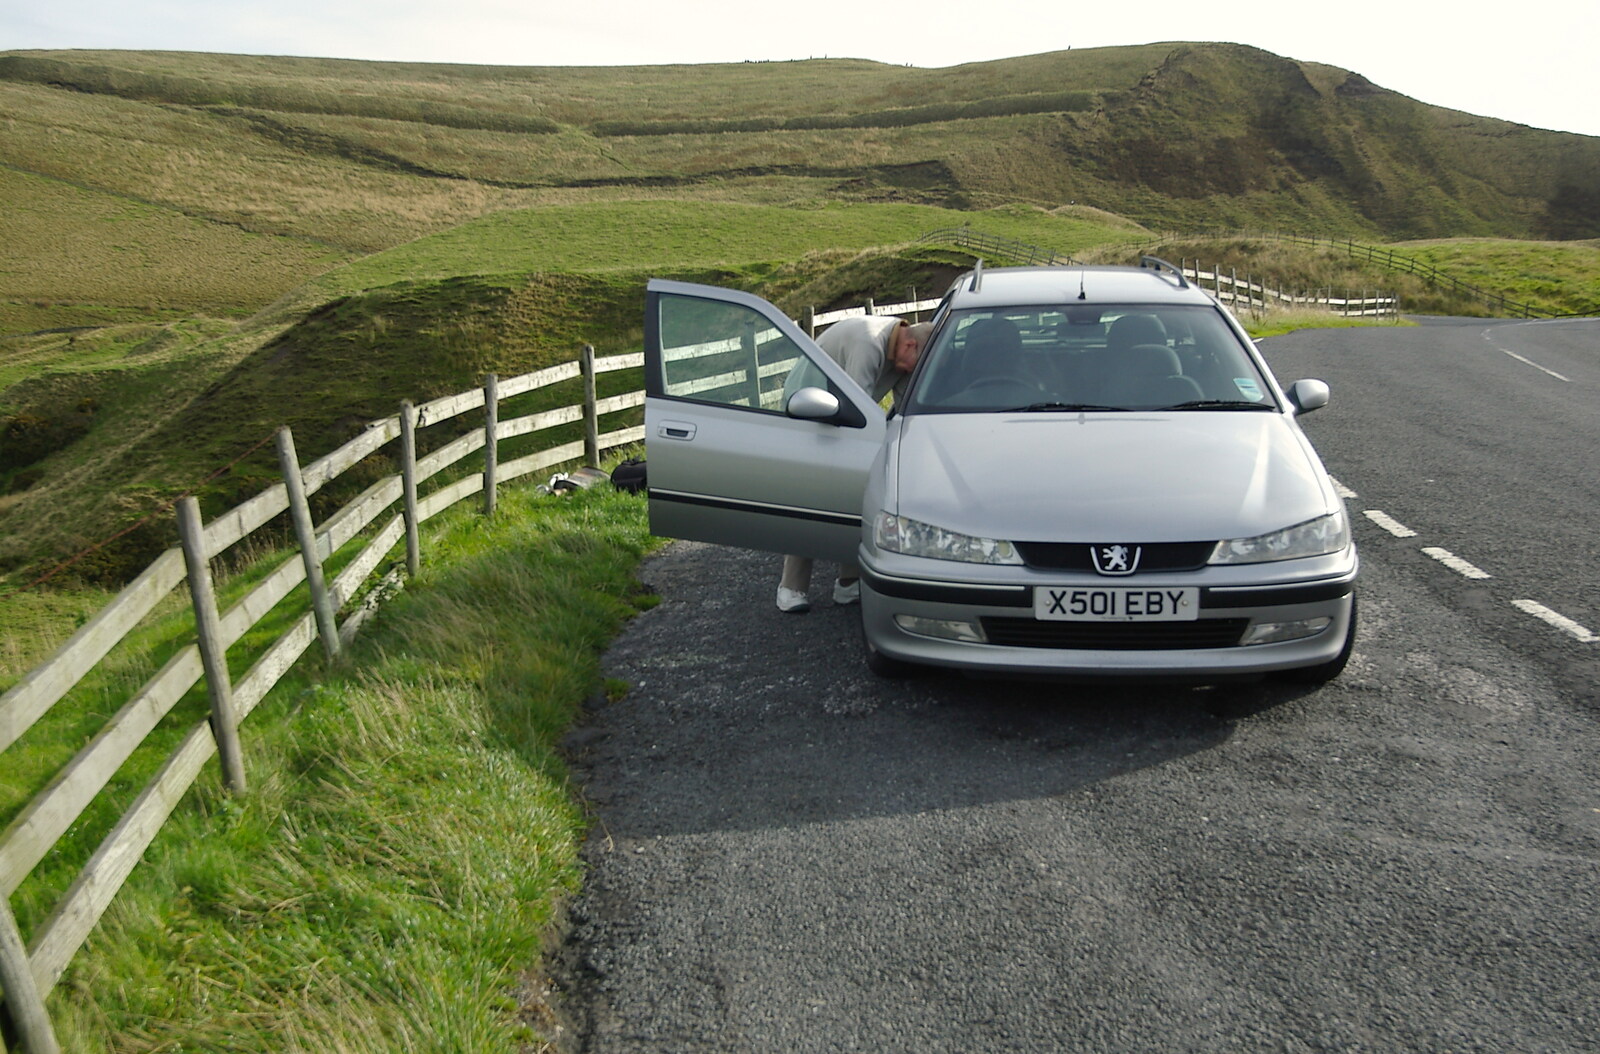 The Old Chap pokes around in the car from The Pennine Way: Lost on Kinder Scout, Derbyshire - 9th October 2005